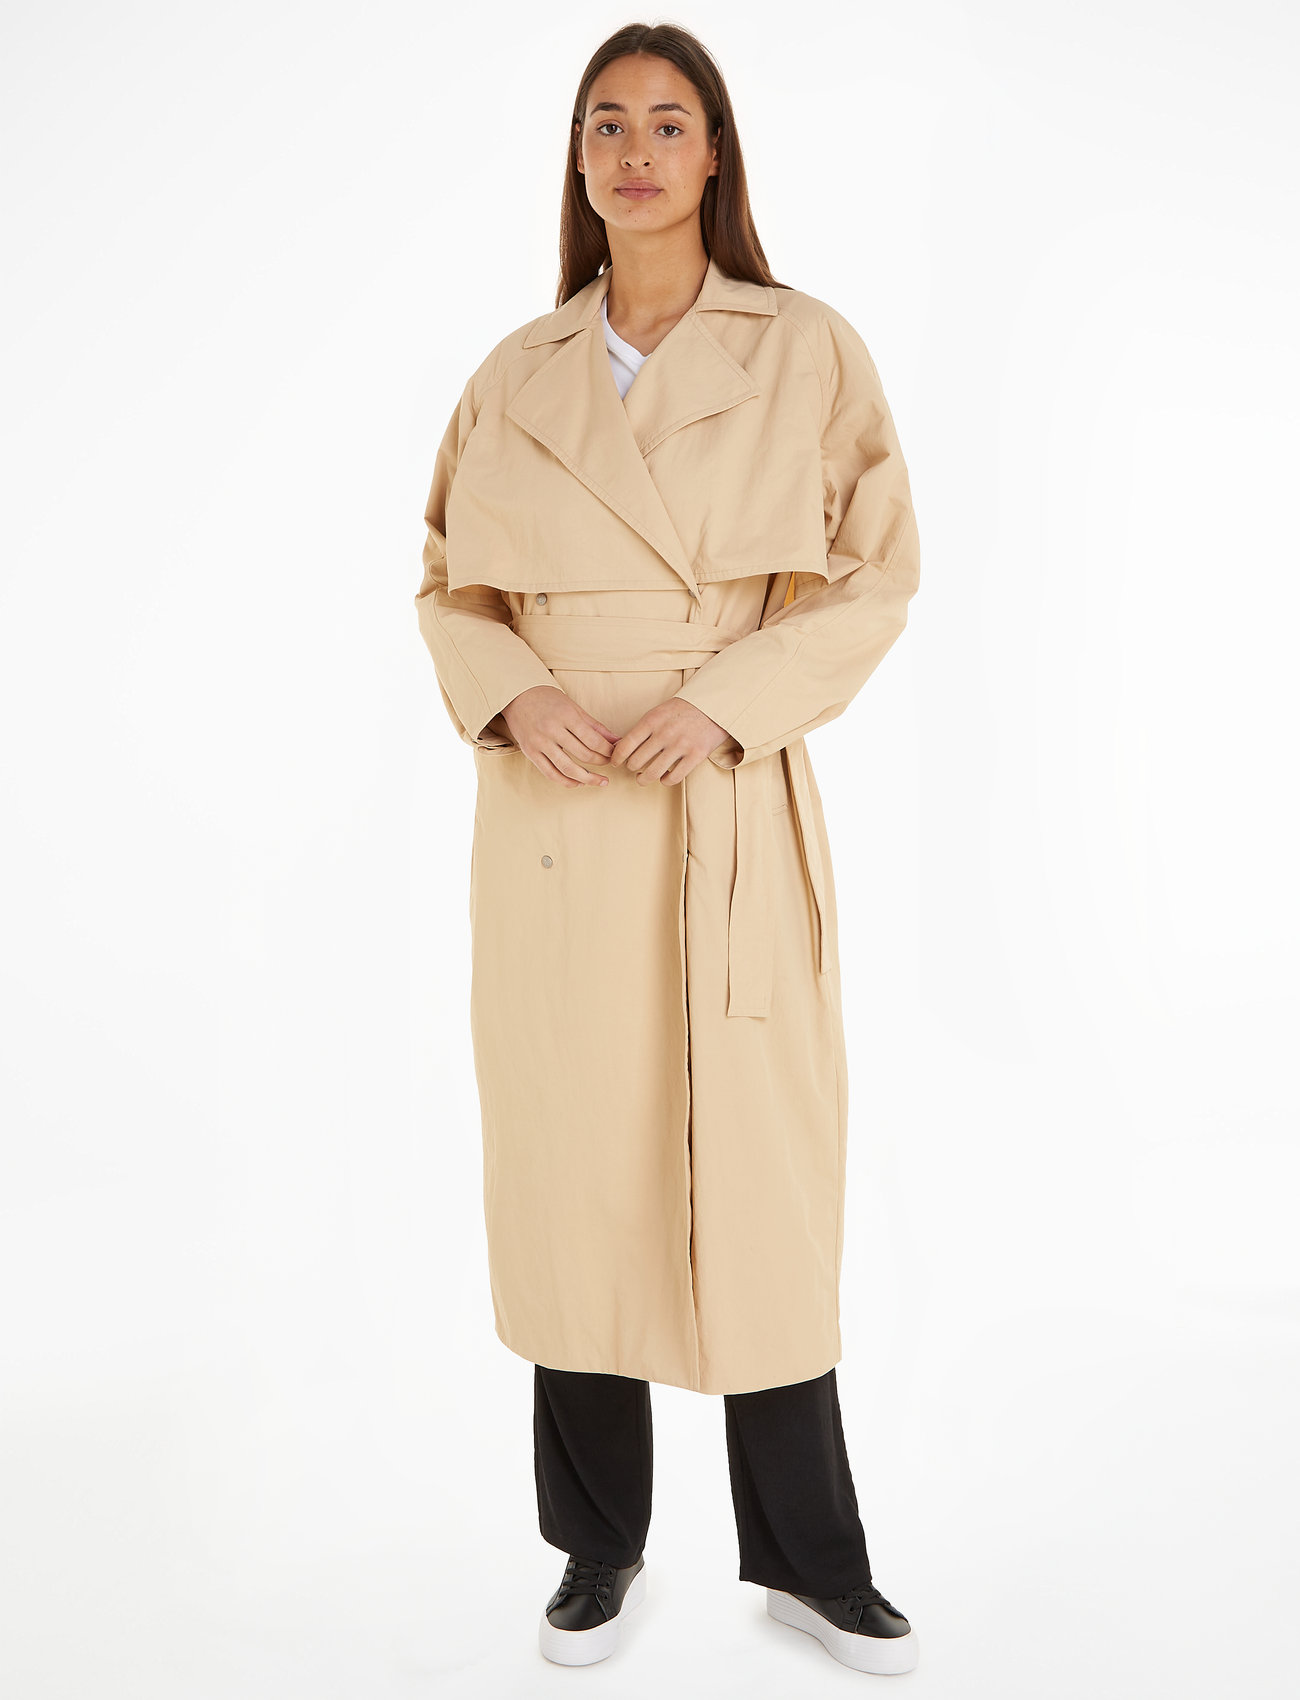 Calvin Klein Jeans Belted Trench Coat - 212.42 €. Buy Trench coats from Calvin  Klein Jeans online at Boozt.com. Fast delivery and easy returns